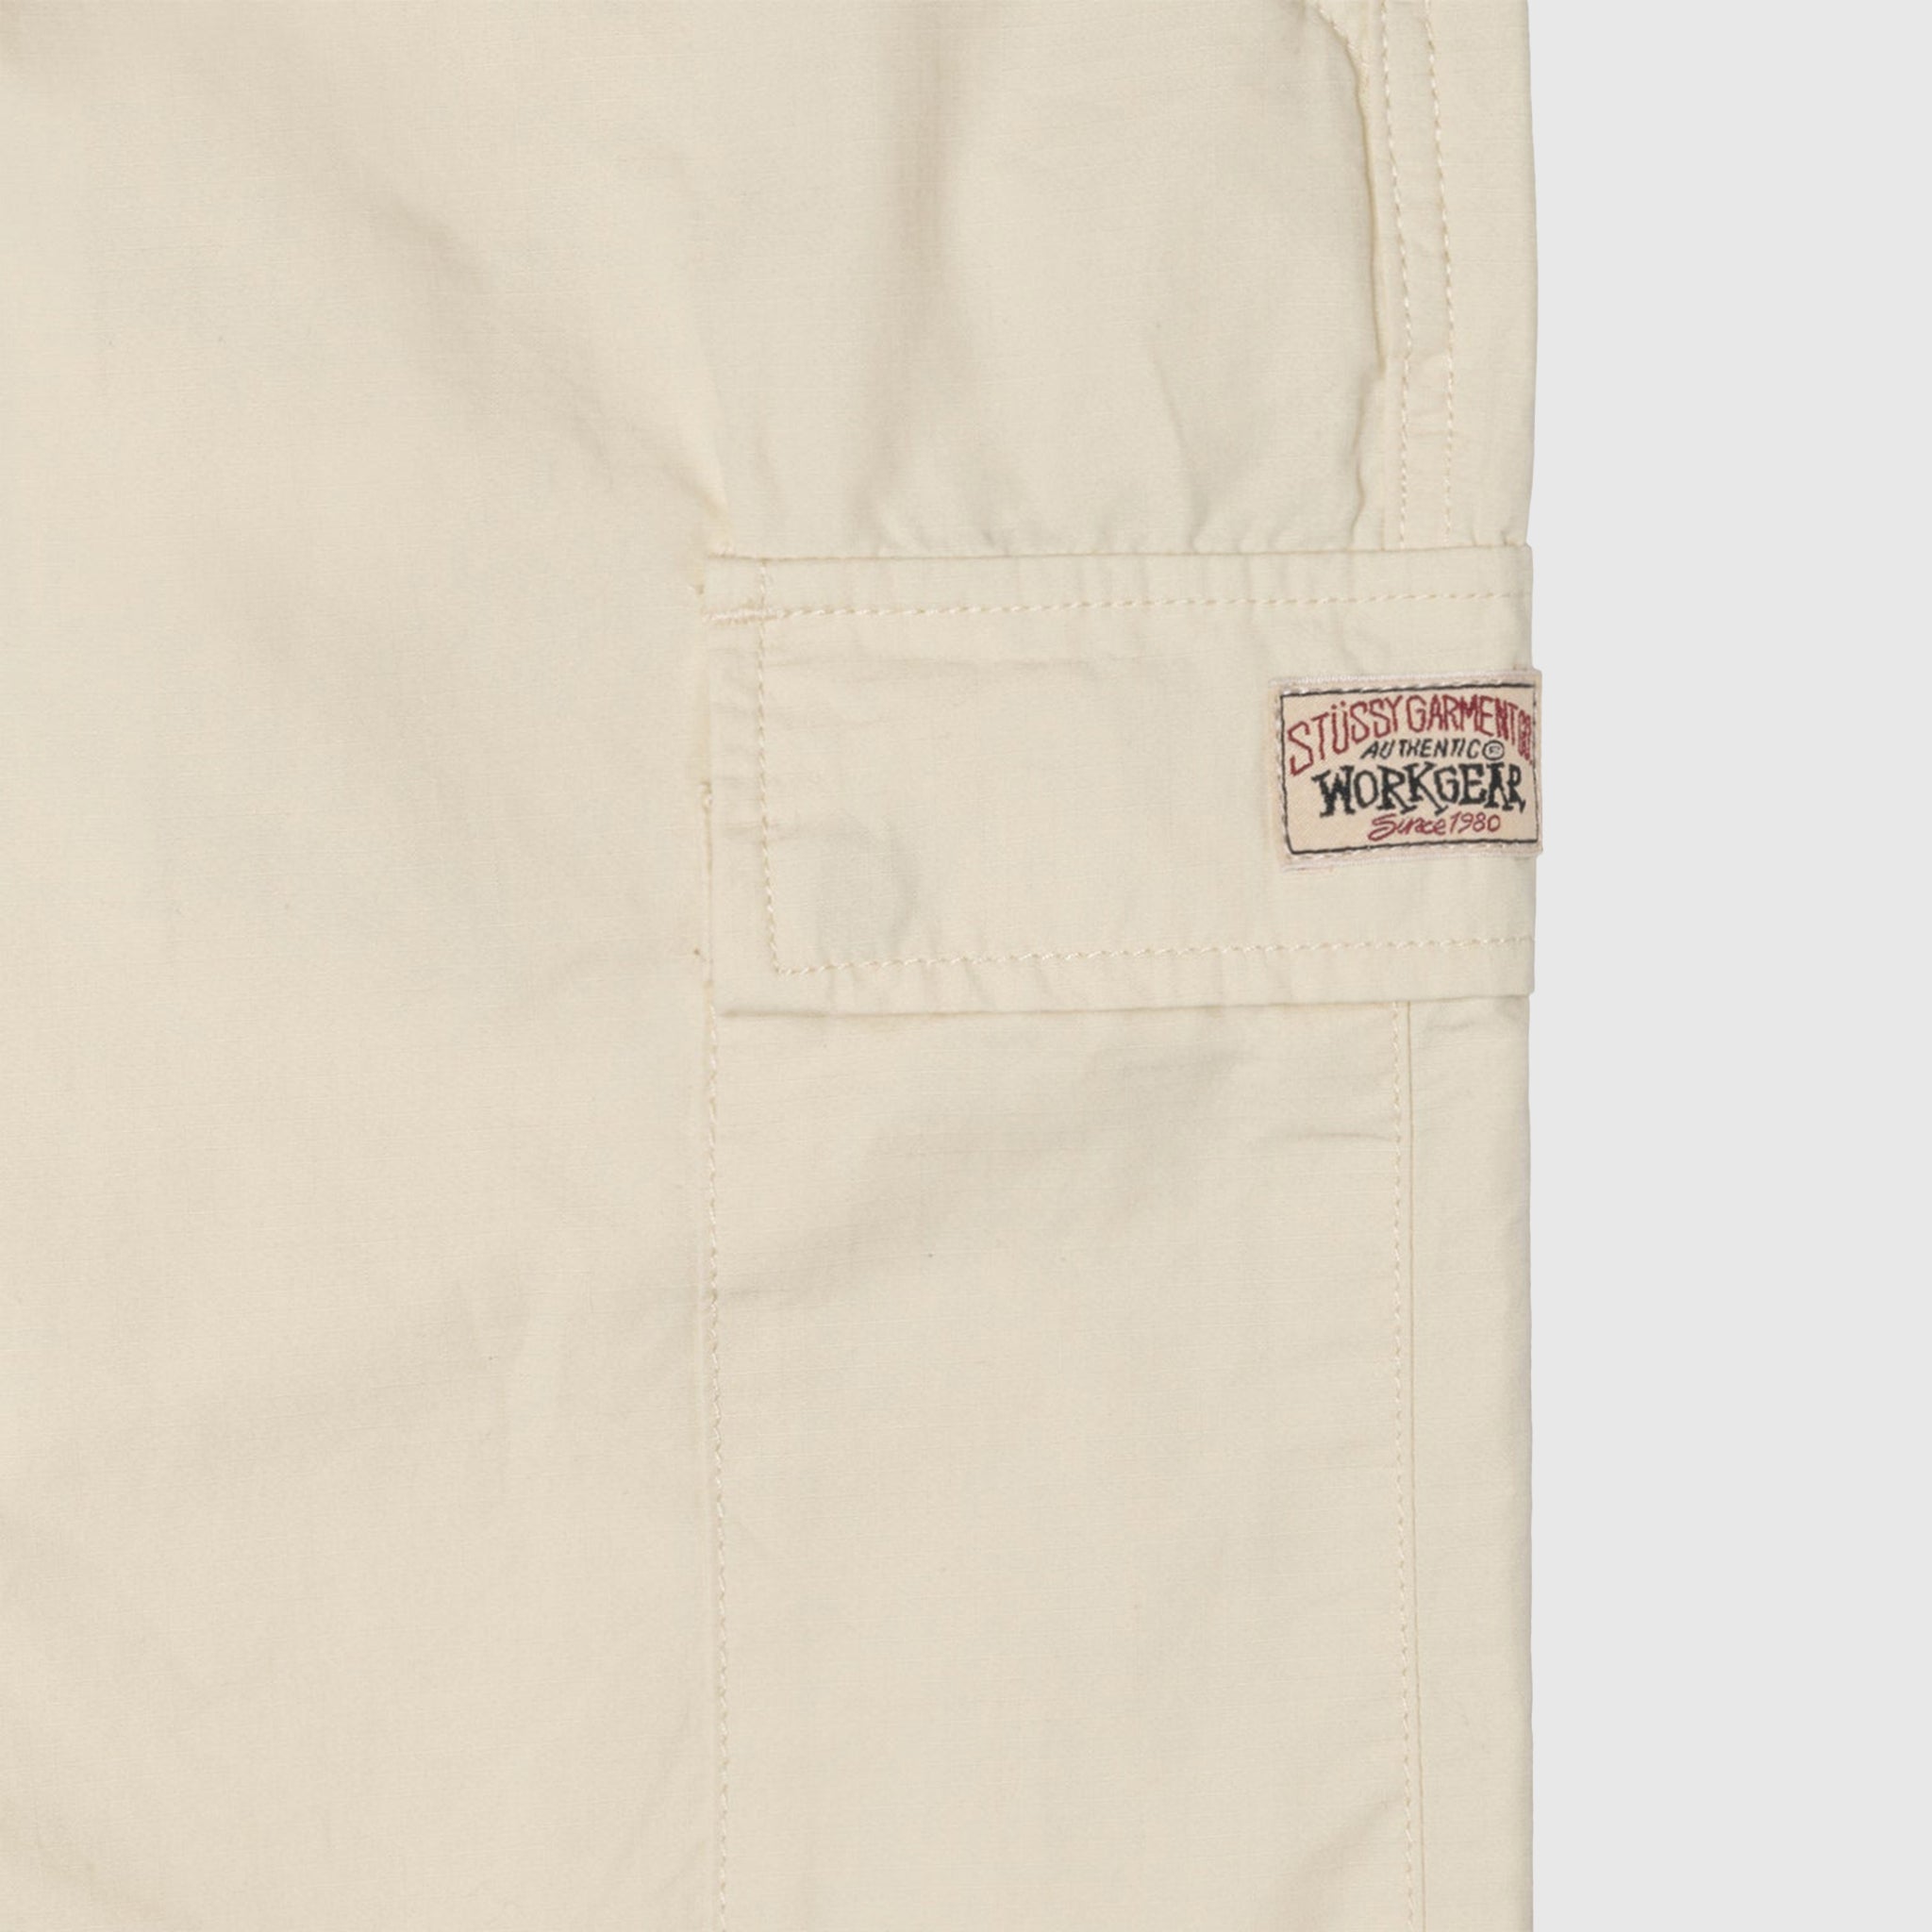 RIPSTOP CARGO BEACH PANT – PACKER SHOES